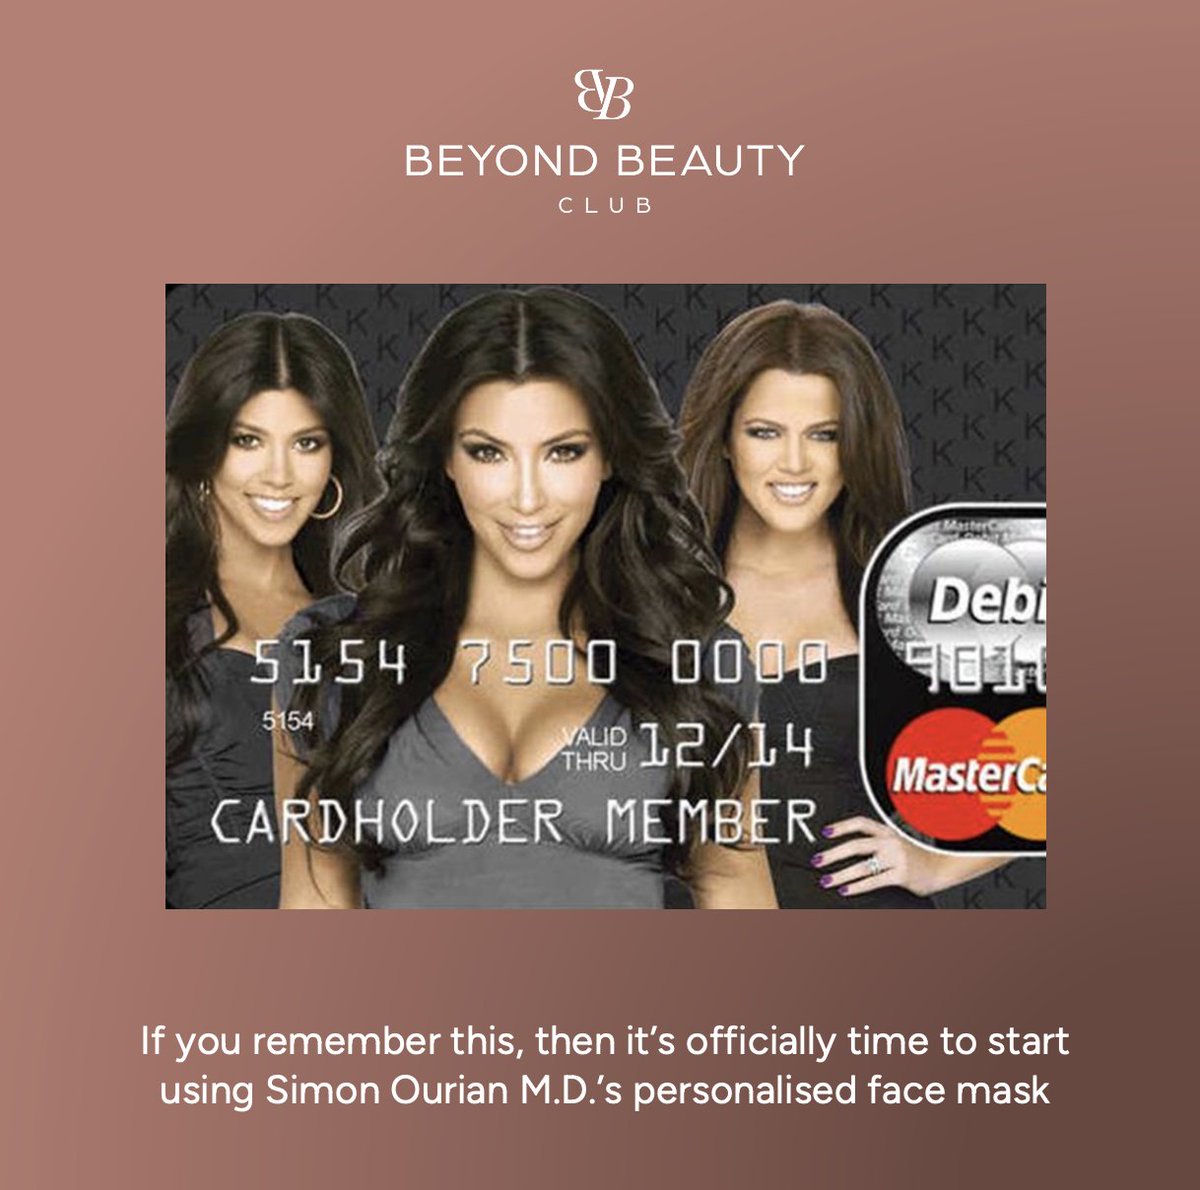 If you remember this ICONIC credit card, it's time to treat yourself to @SimonOurian_MD 's personalised face mask. Your skin deserves a VIP experience! 💳✨

#SkincareUpgrade #Iconic #SimonOurianMD #BeyondBeautyClub #unleashyourpower #unleashyourbeauty